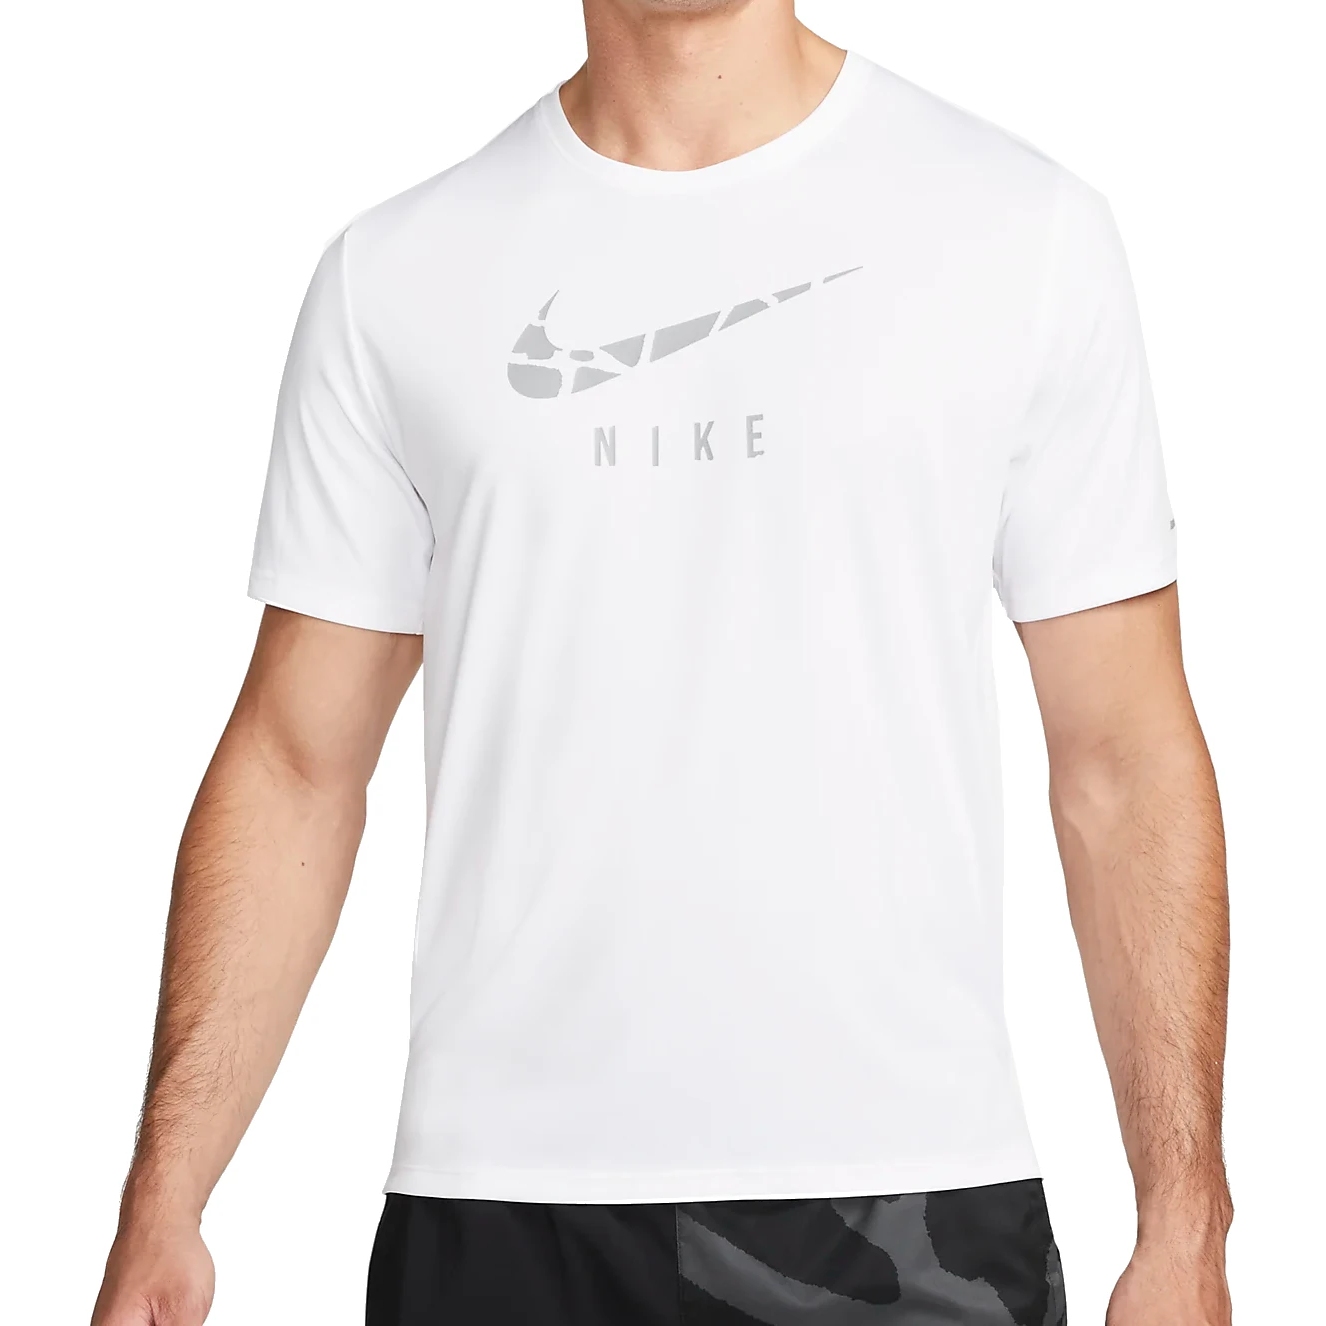 Nike Distance White Sublimated Dri-FIT Running Shirt For Men on Sale